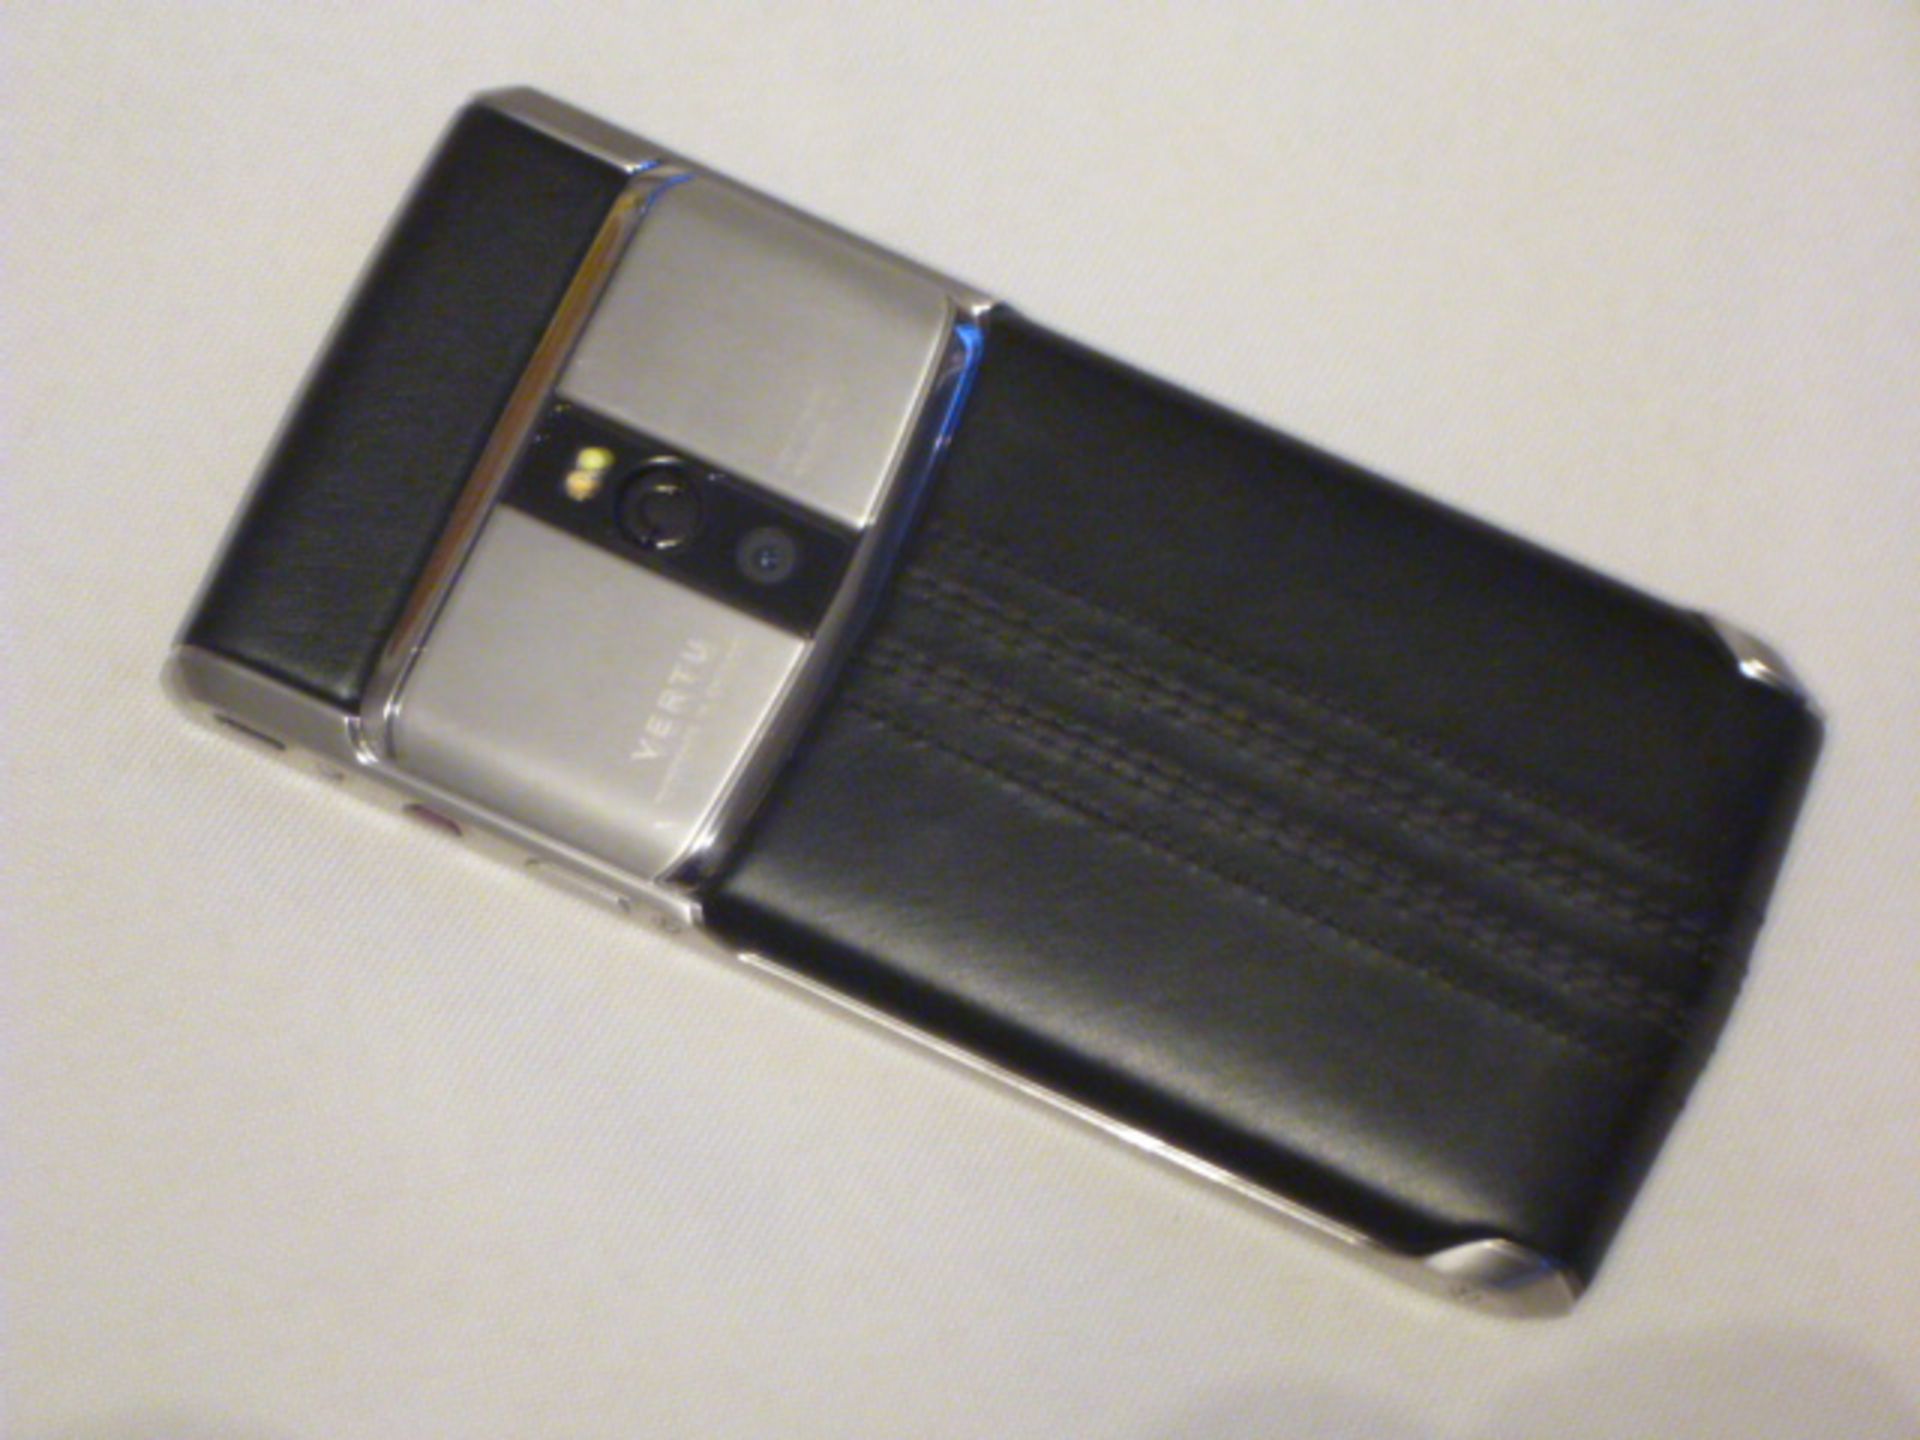 Vertu Signature Touch, Jet Calf. Demonstrator, S/N 3-001590. Tested Working, but without Warranty or - Image 2 of 2